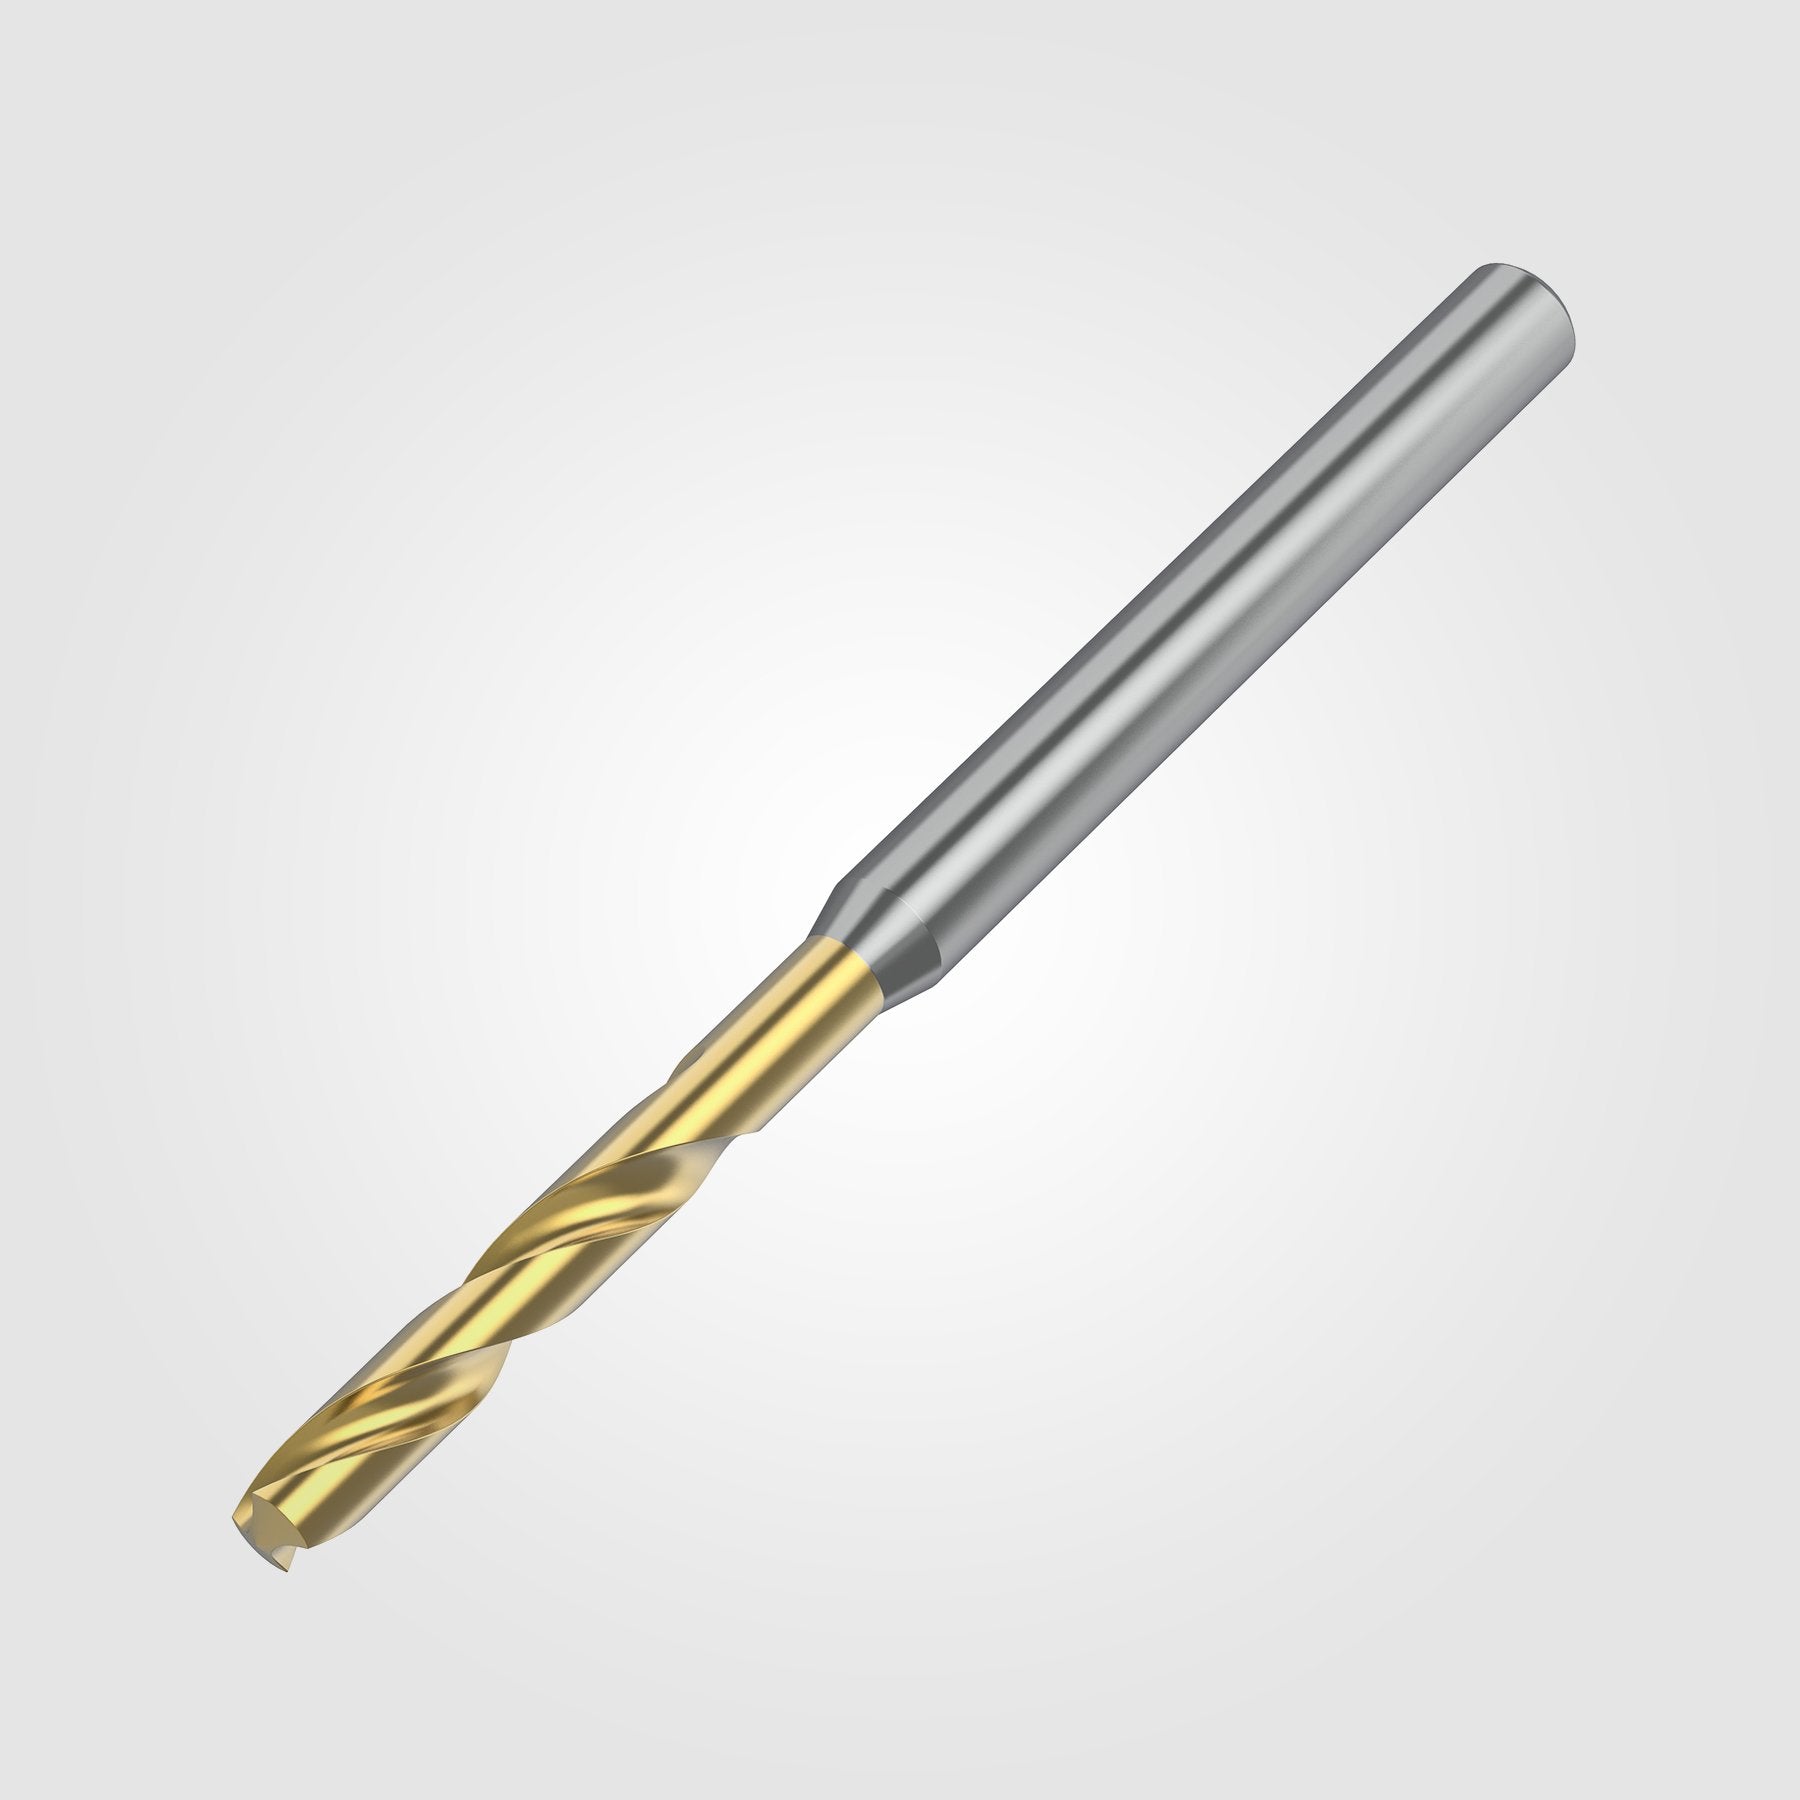 GOdrill (THROUGH COOLANT) | 9.7mm / .3819" / 3xD | SOLID CARBIDE DRILL | 4151198